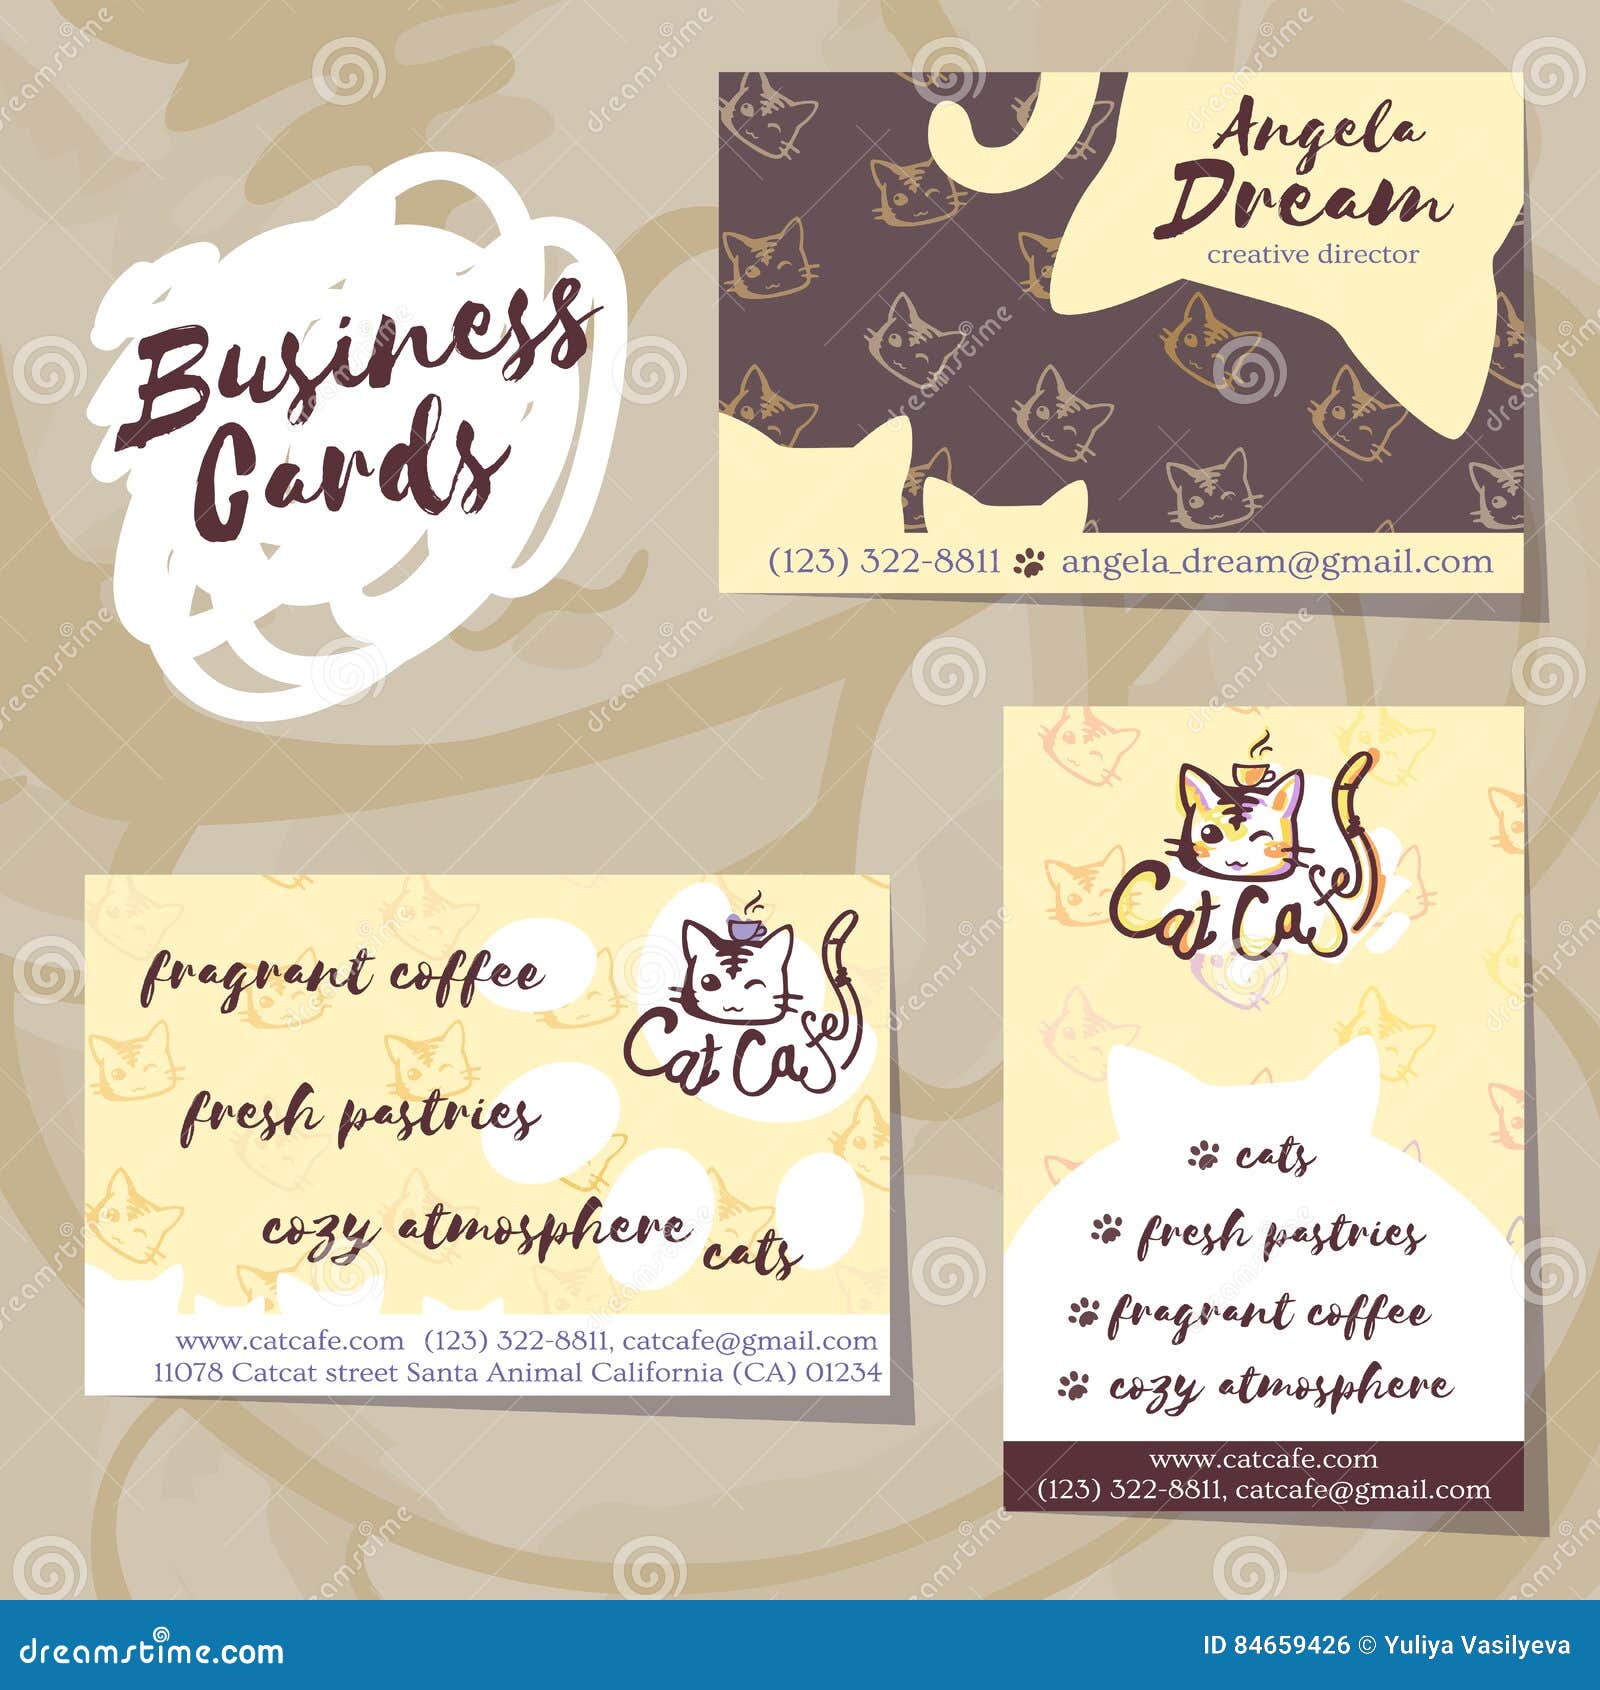  Business  Cards For Cat  Cafe  Stock Vector Illustration of 